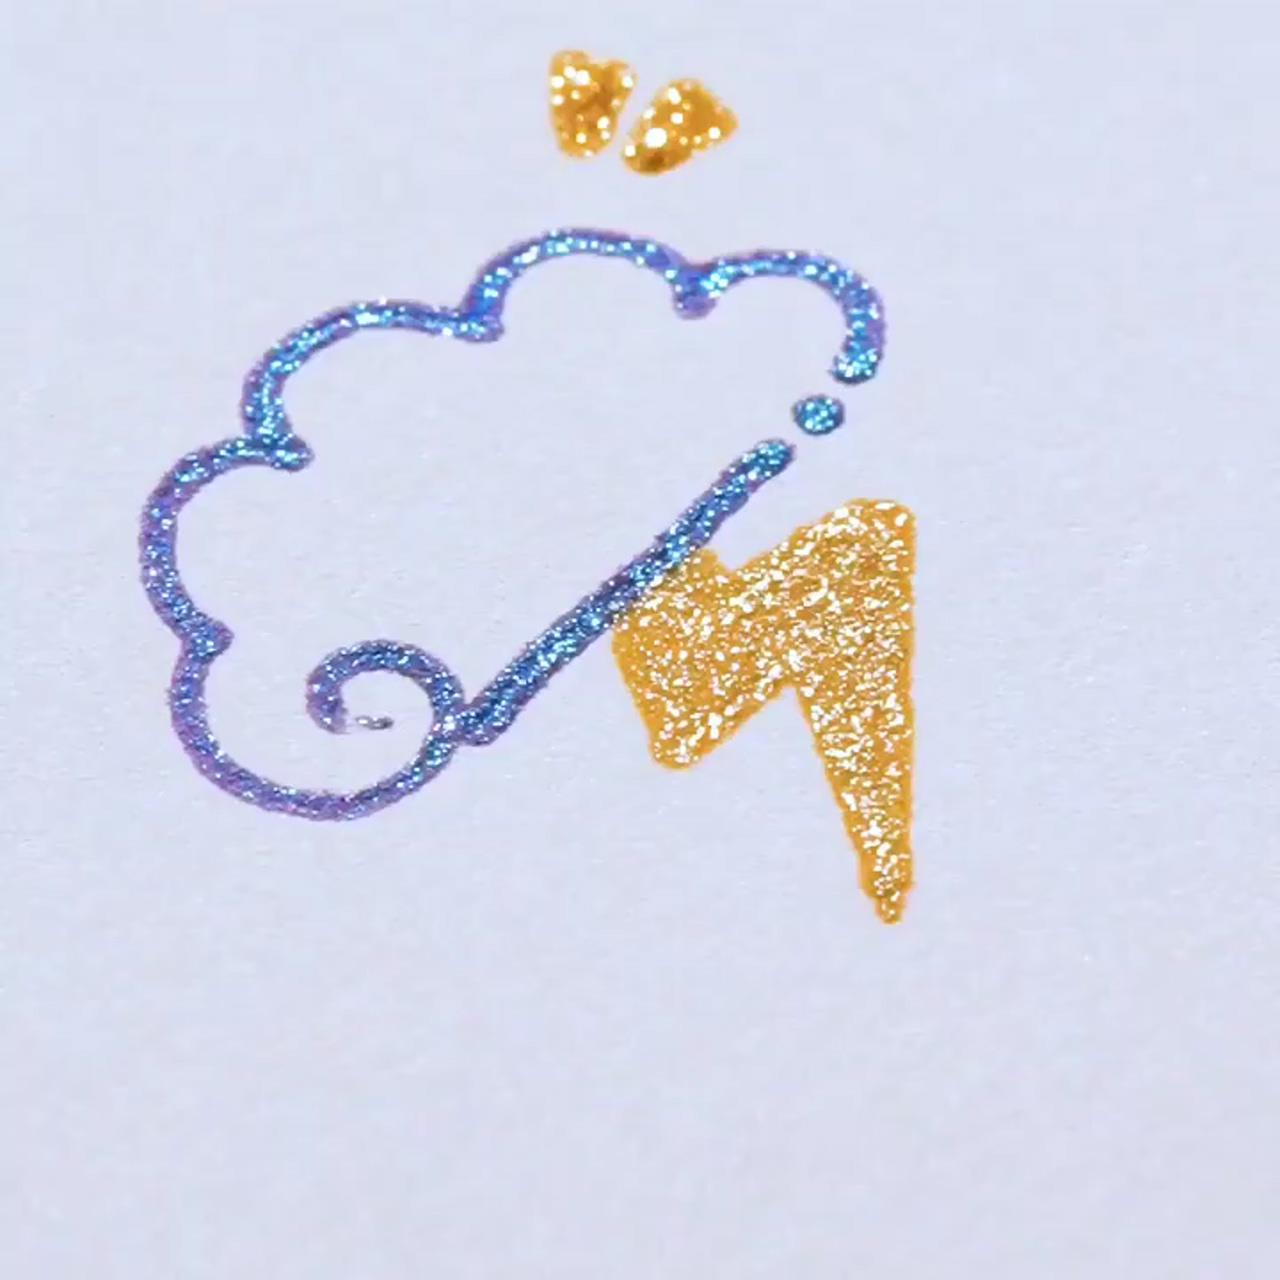 Get bold line glitter pen atwww. paperhouse. mesave 3 with code "pin3"paperhouse stationery; gel pen doodles